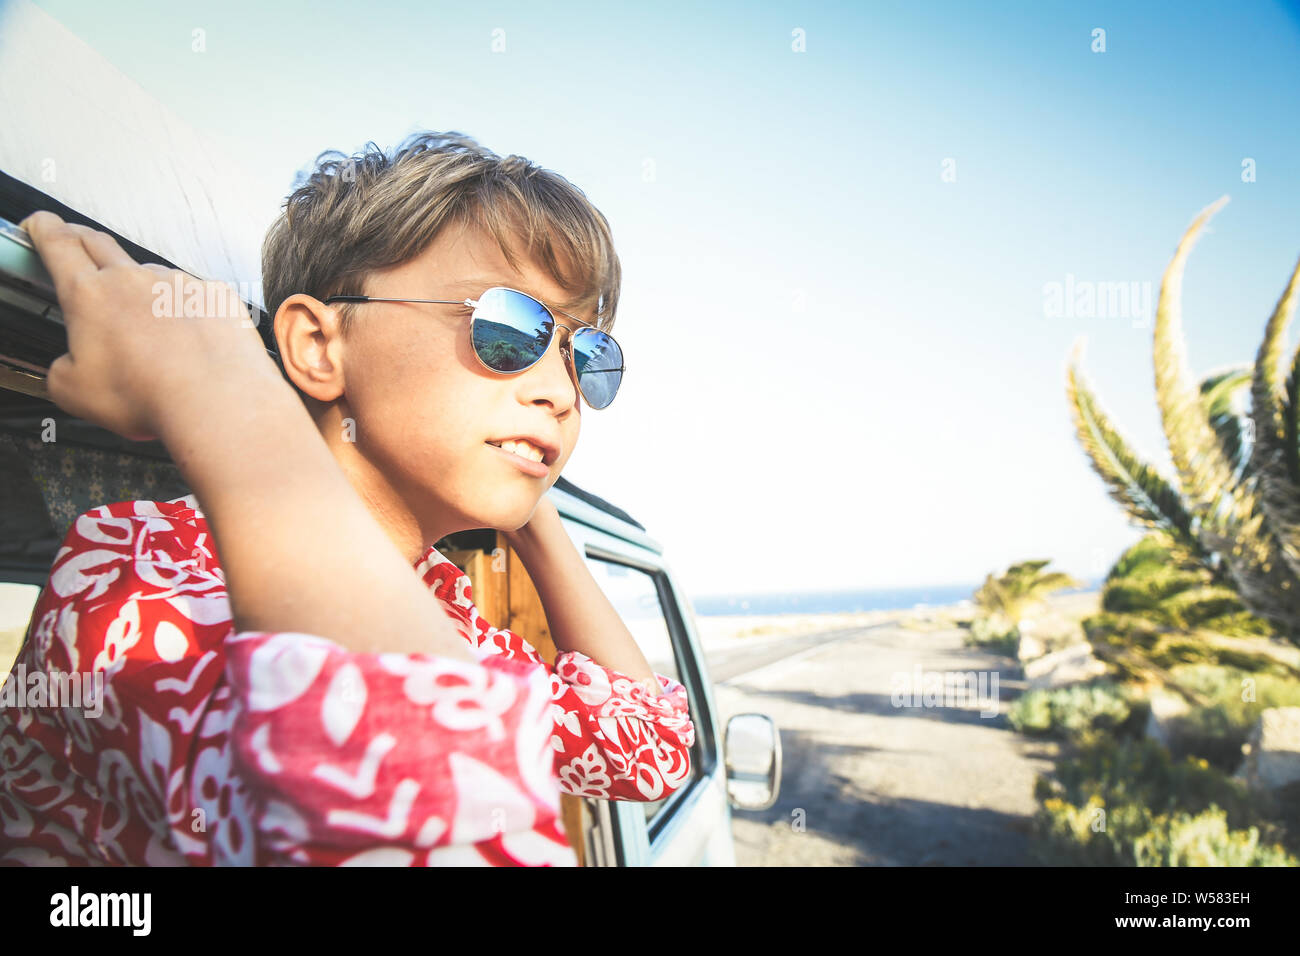 https://c8.alamy.com/comp/W583EH/handsome-teenage-boy-with-sunglasses-posing-charming-out-the-window-of-a-vintage-van-dressed-as-a-flower-hippie-child-concept-of-freedom-and-lighthea-W583EH.jpg